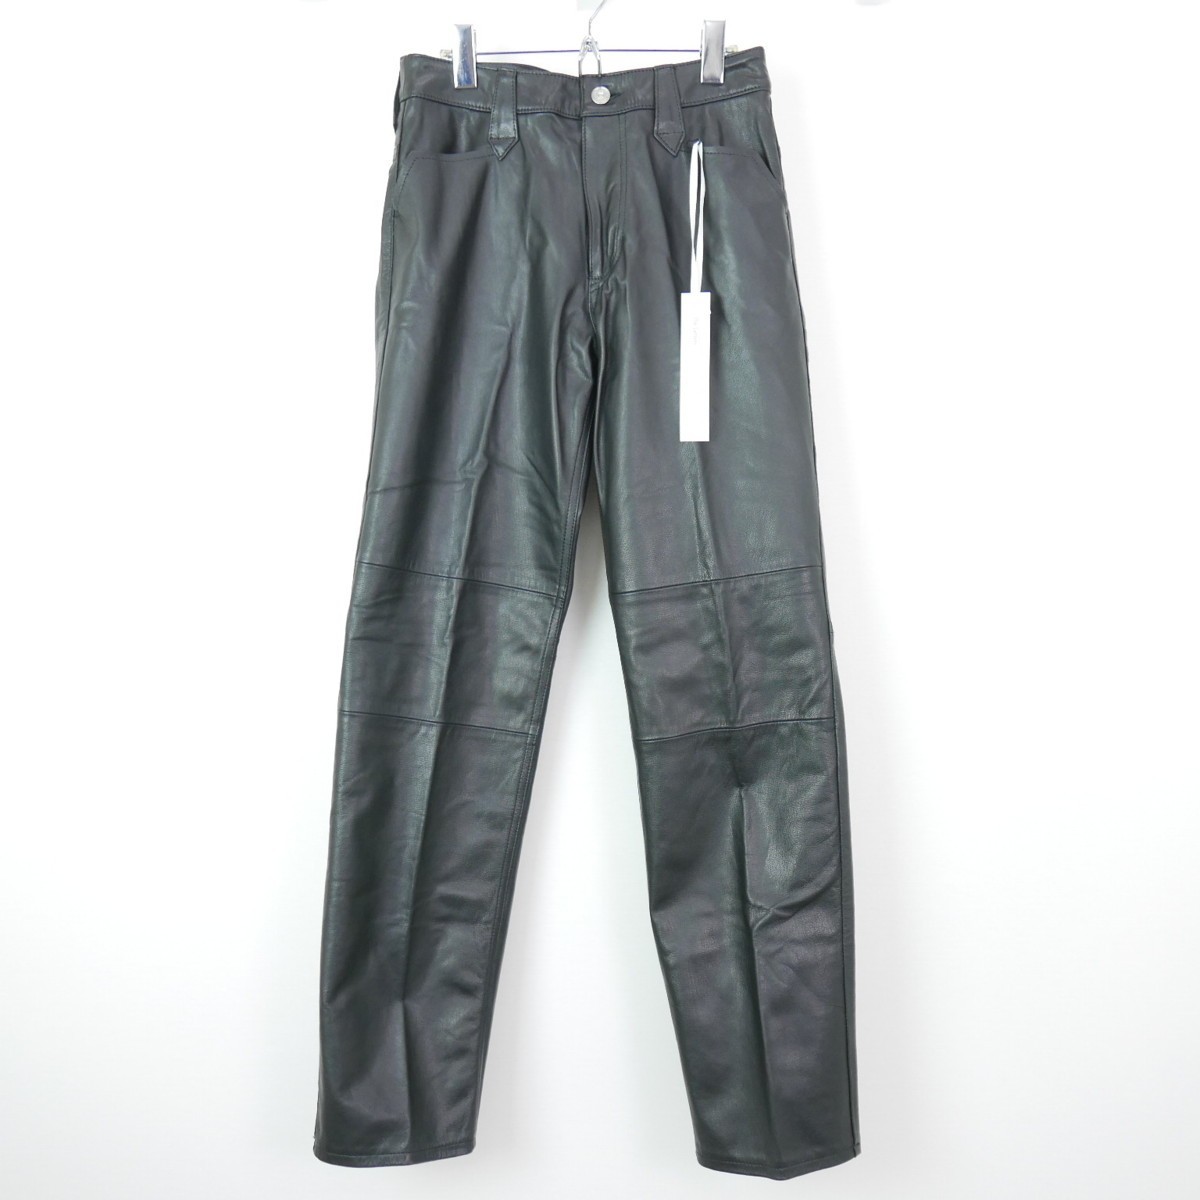 19SS The Letters ザ レターズ 人気ブラドン Western Regular Pants. 世界有名な 山羊革 パンツ -Goat レザー Leather- S BLACK ゴート